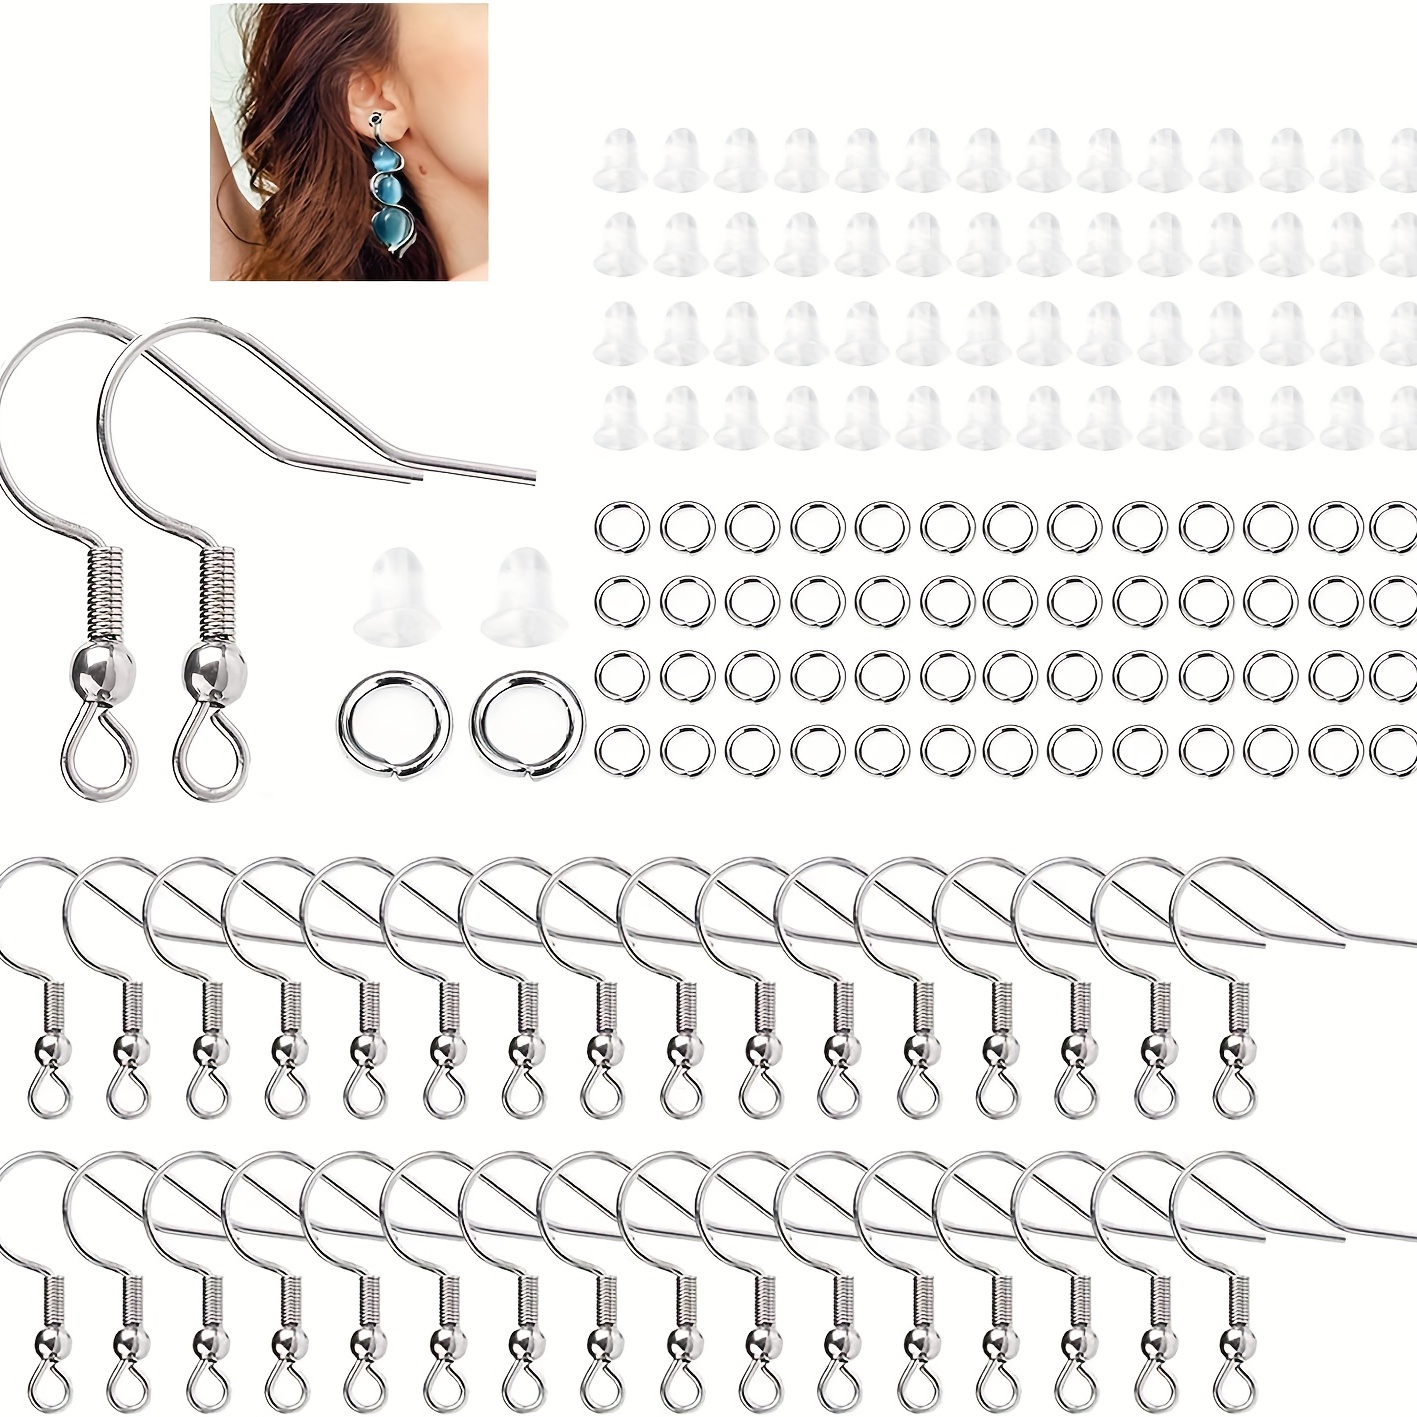 Earring Hooks Hypoallergenic Stainless Steel, 120pcs Ear Wires Fish Hooks Earrings for DIY Jewelry Making with Jump Rings and Clear Rubber Earring